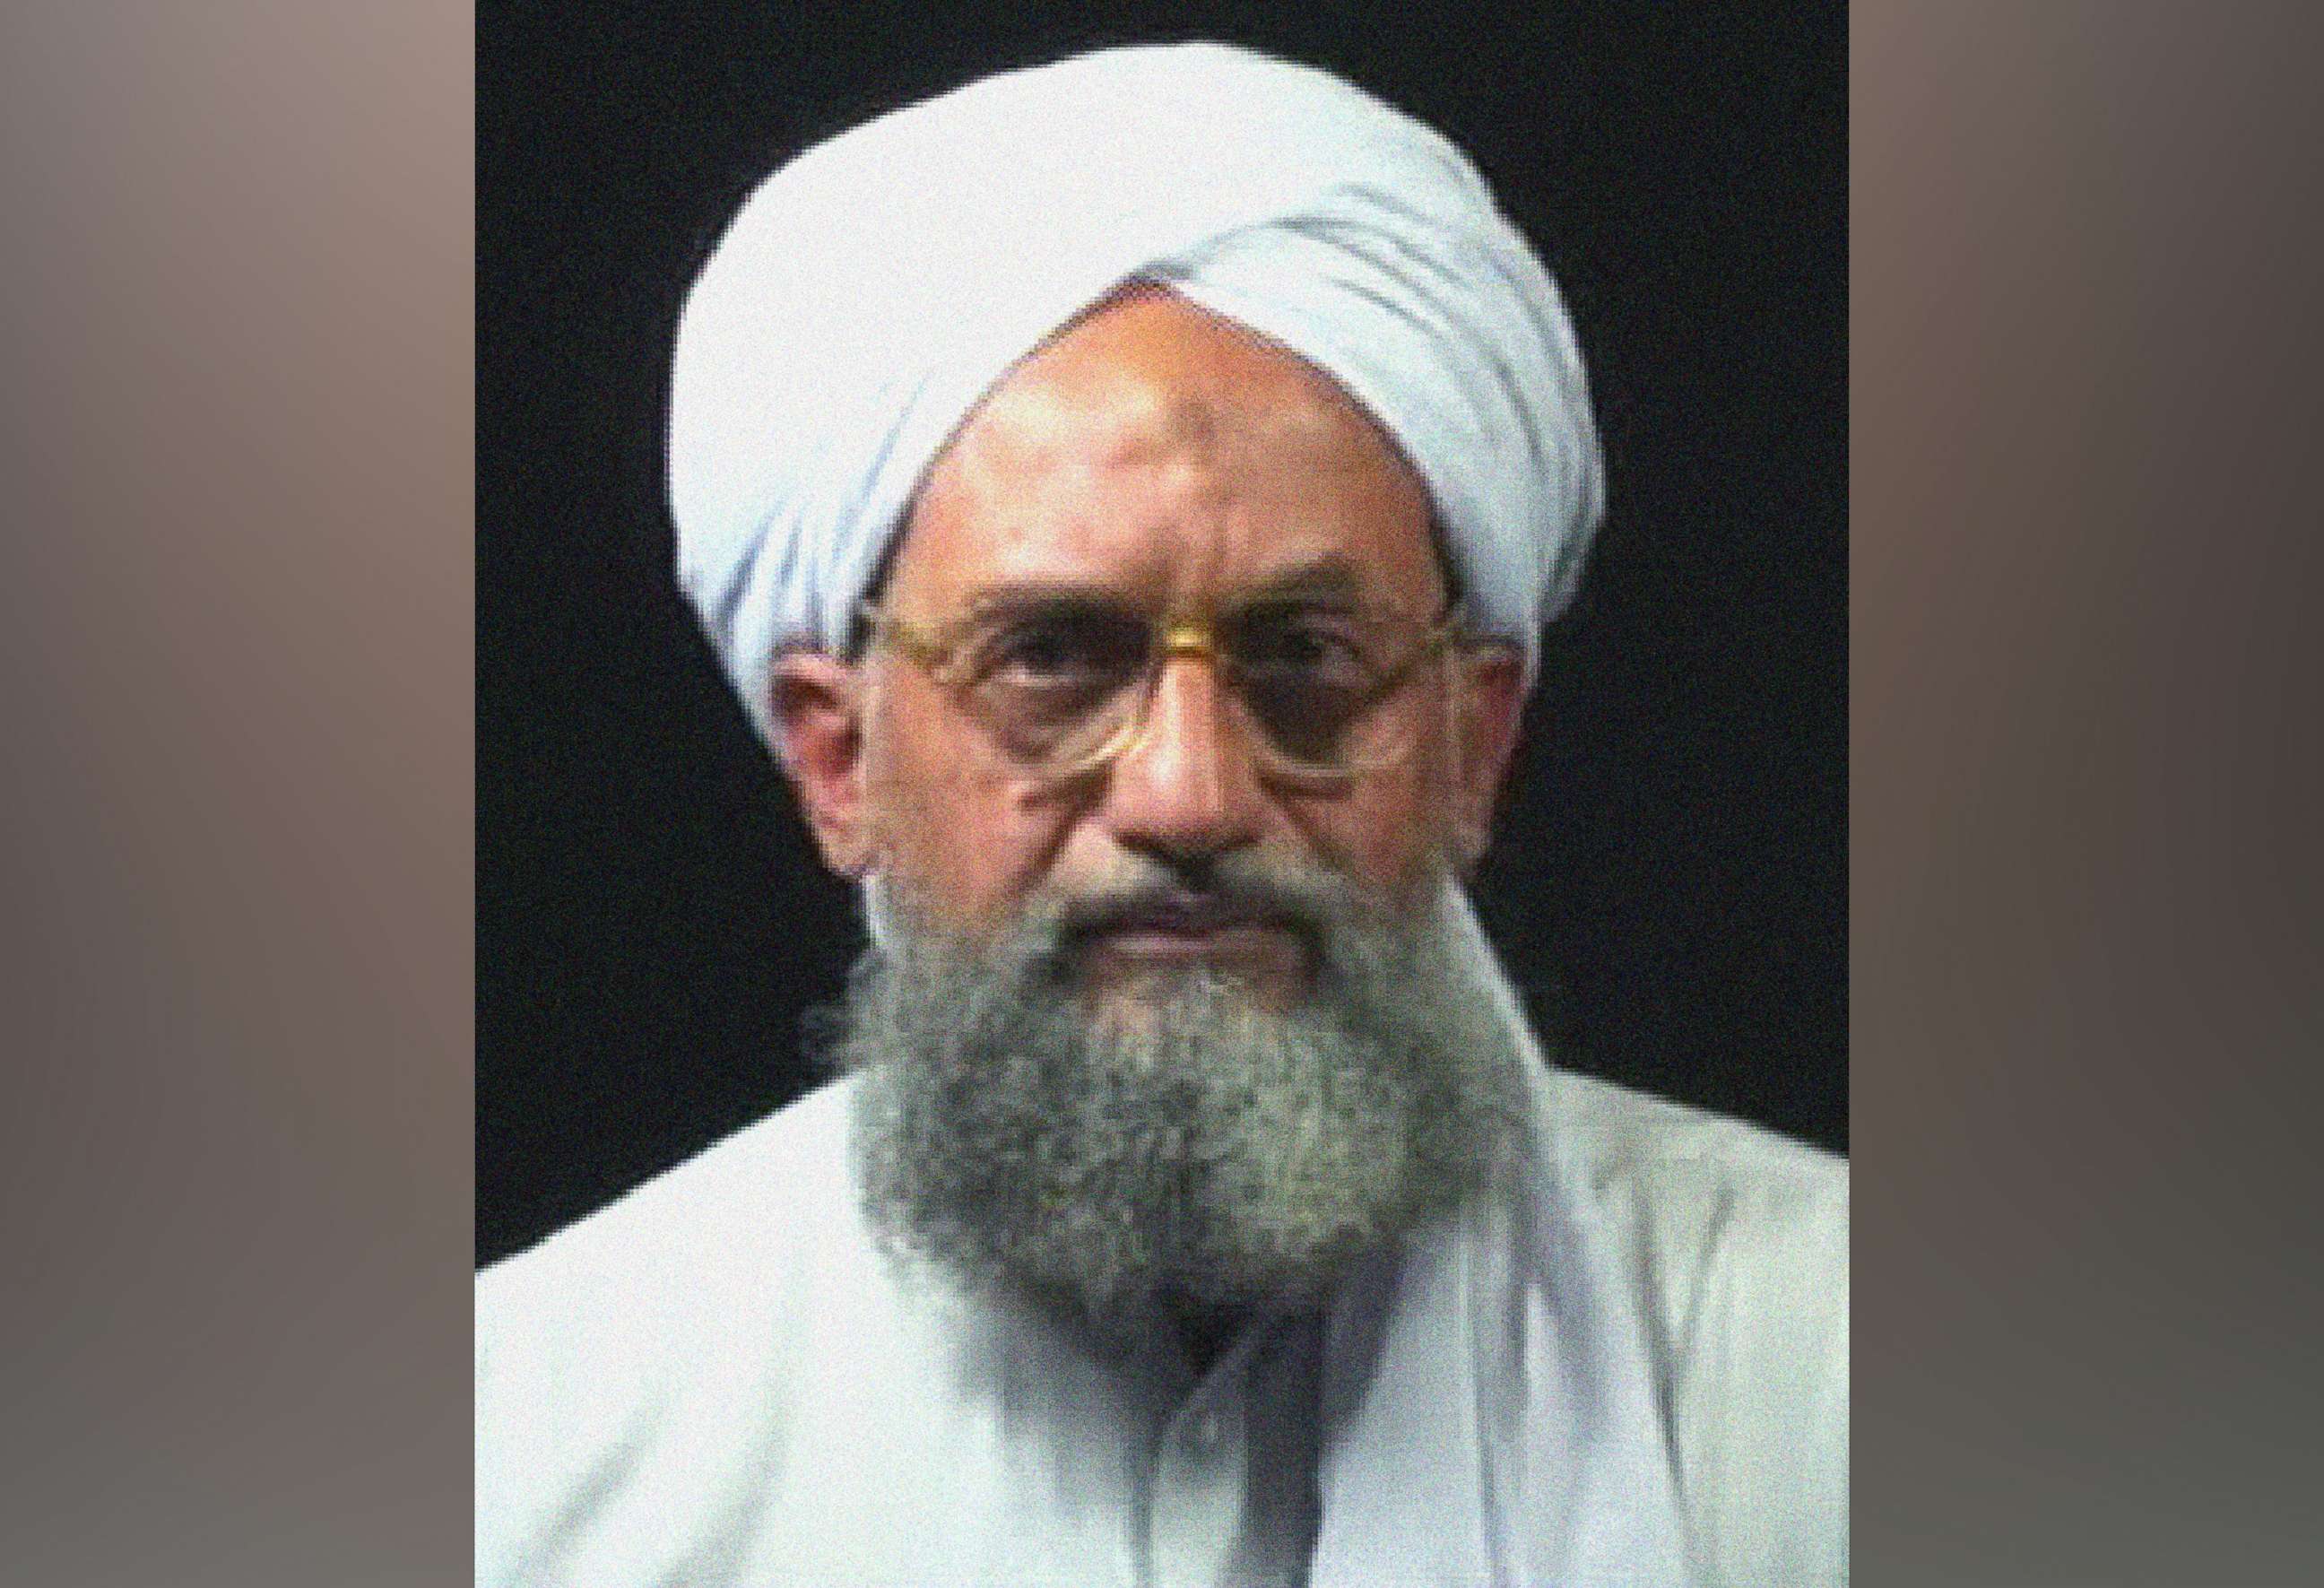 PHOTO: Ayman Al-Zawahiri is pictured at an undisclosed place and time, in an image taken from video aired on Al-Jazeera television network, on Aug. 5, 2006.